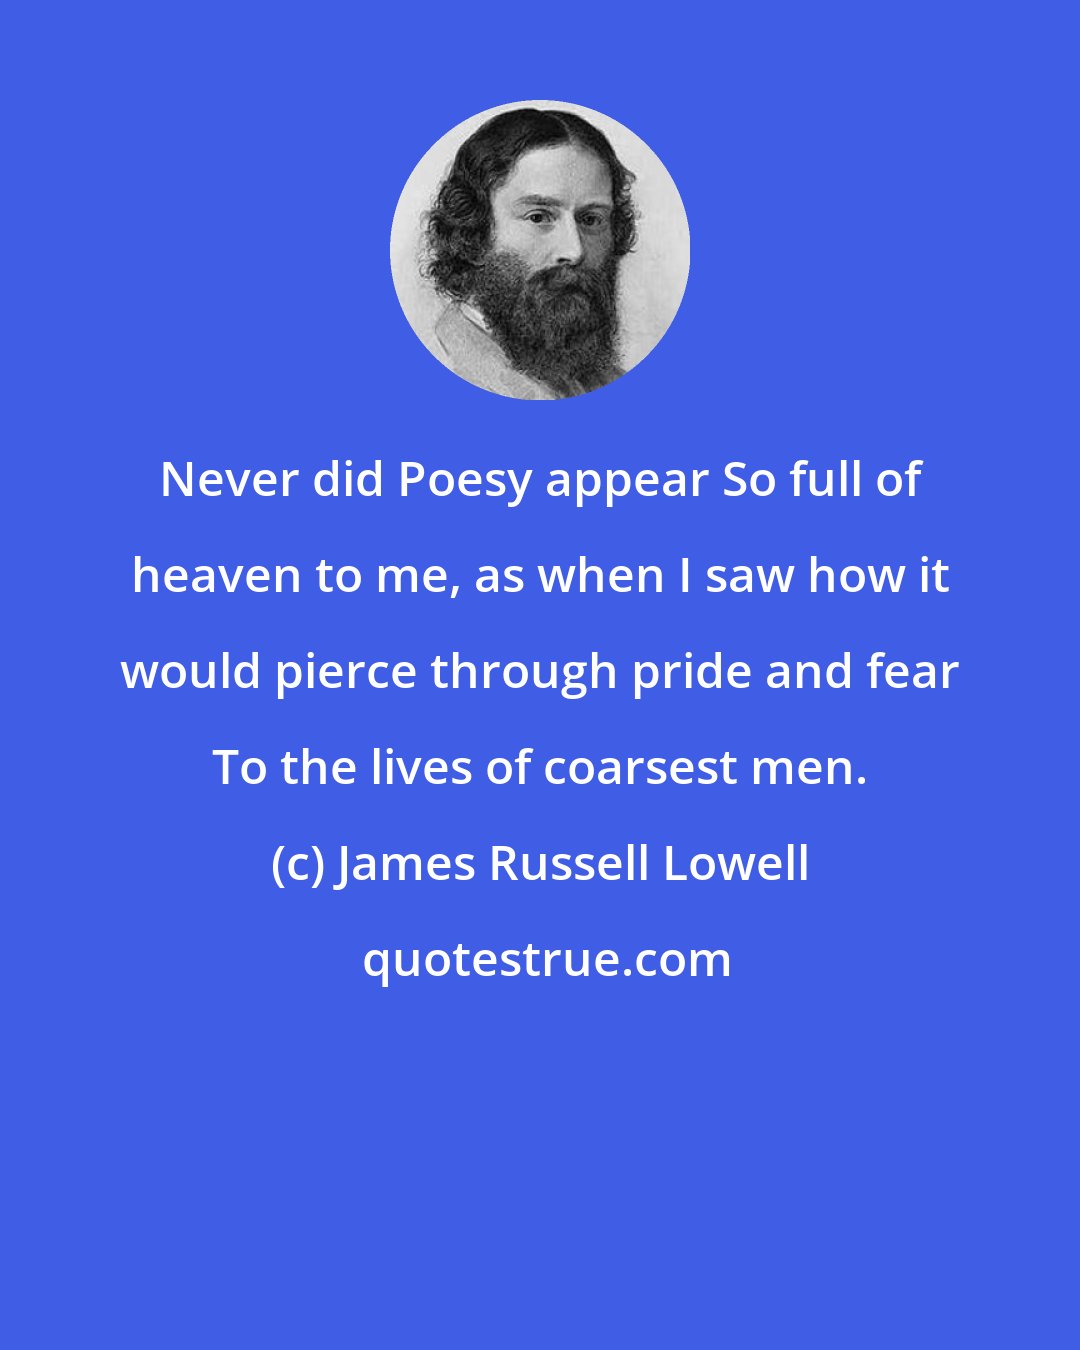 James Russell Lowell: Never did Poesy appear So full of heaven to me, as when I saw how it would pierce through pride and fear To the lives of coarsest men.